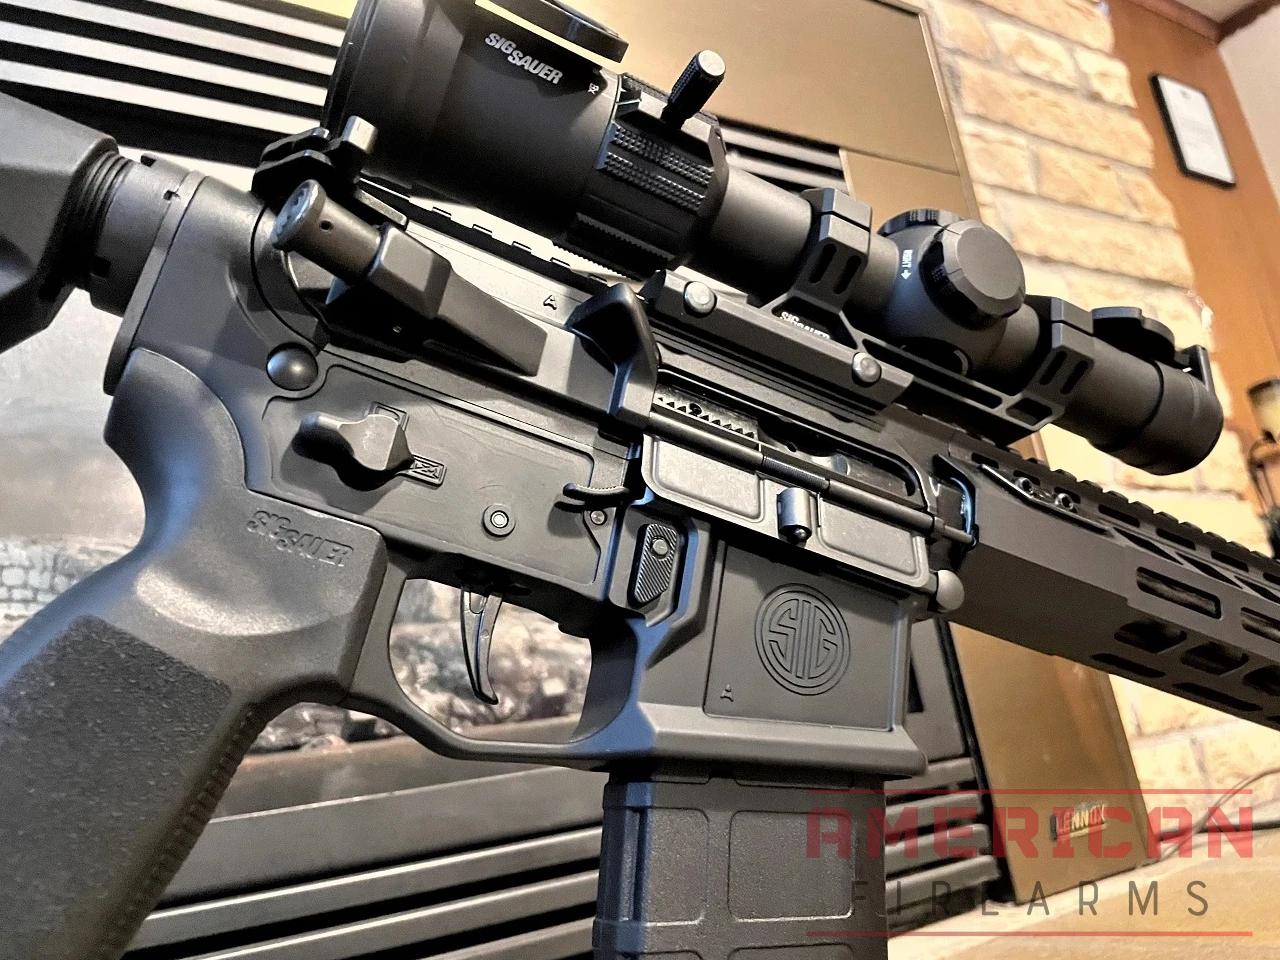 Even after a good 2,000 rounds, the M400 is holding up very well, with expected wear patterns.